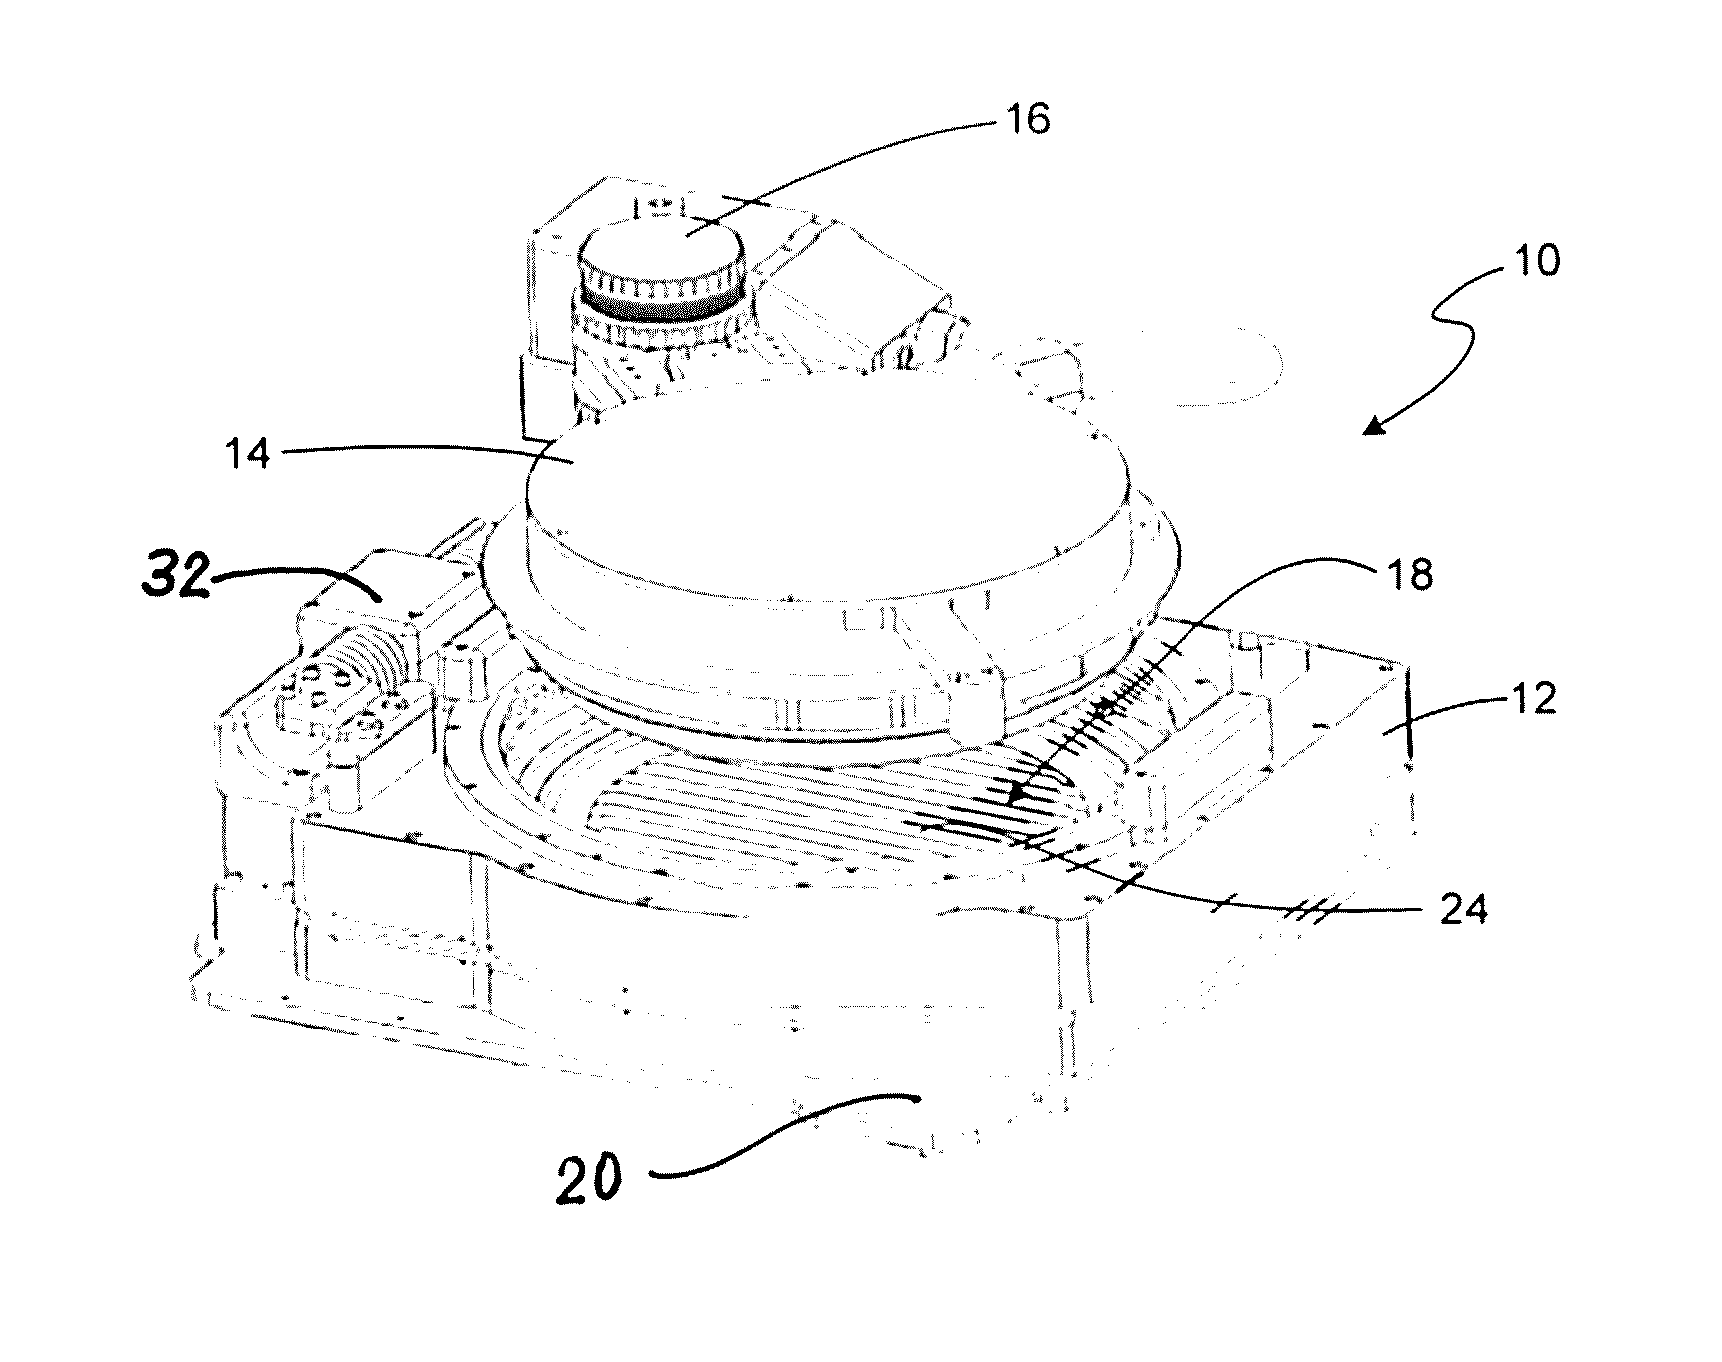 Electroplating apparatus with electrolyte agitation